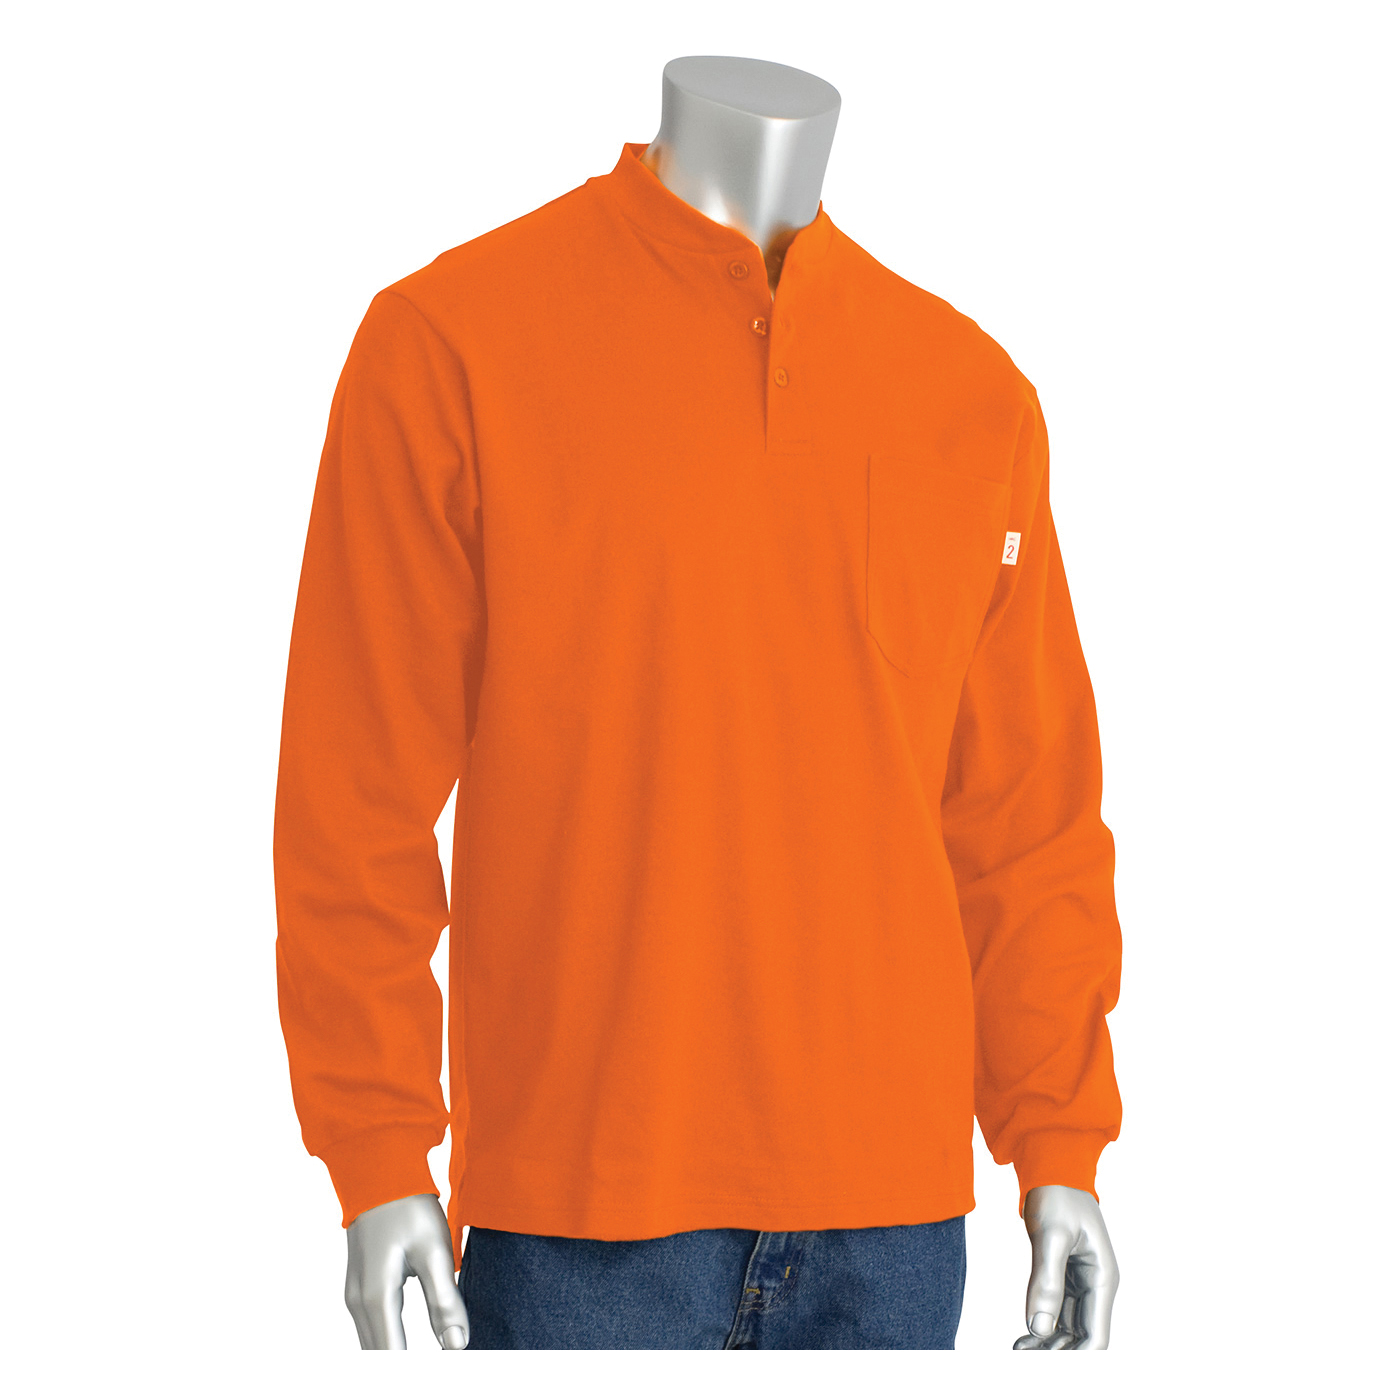 PIP® 385-FRHN-(OR)-2X Arc and Flame-Resistant Long Sleeve Henley Shirt, 2XL, Orange, Cotton Interlock Knit, 33-1/2 in L